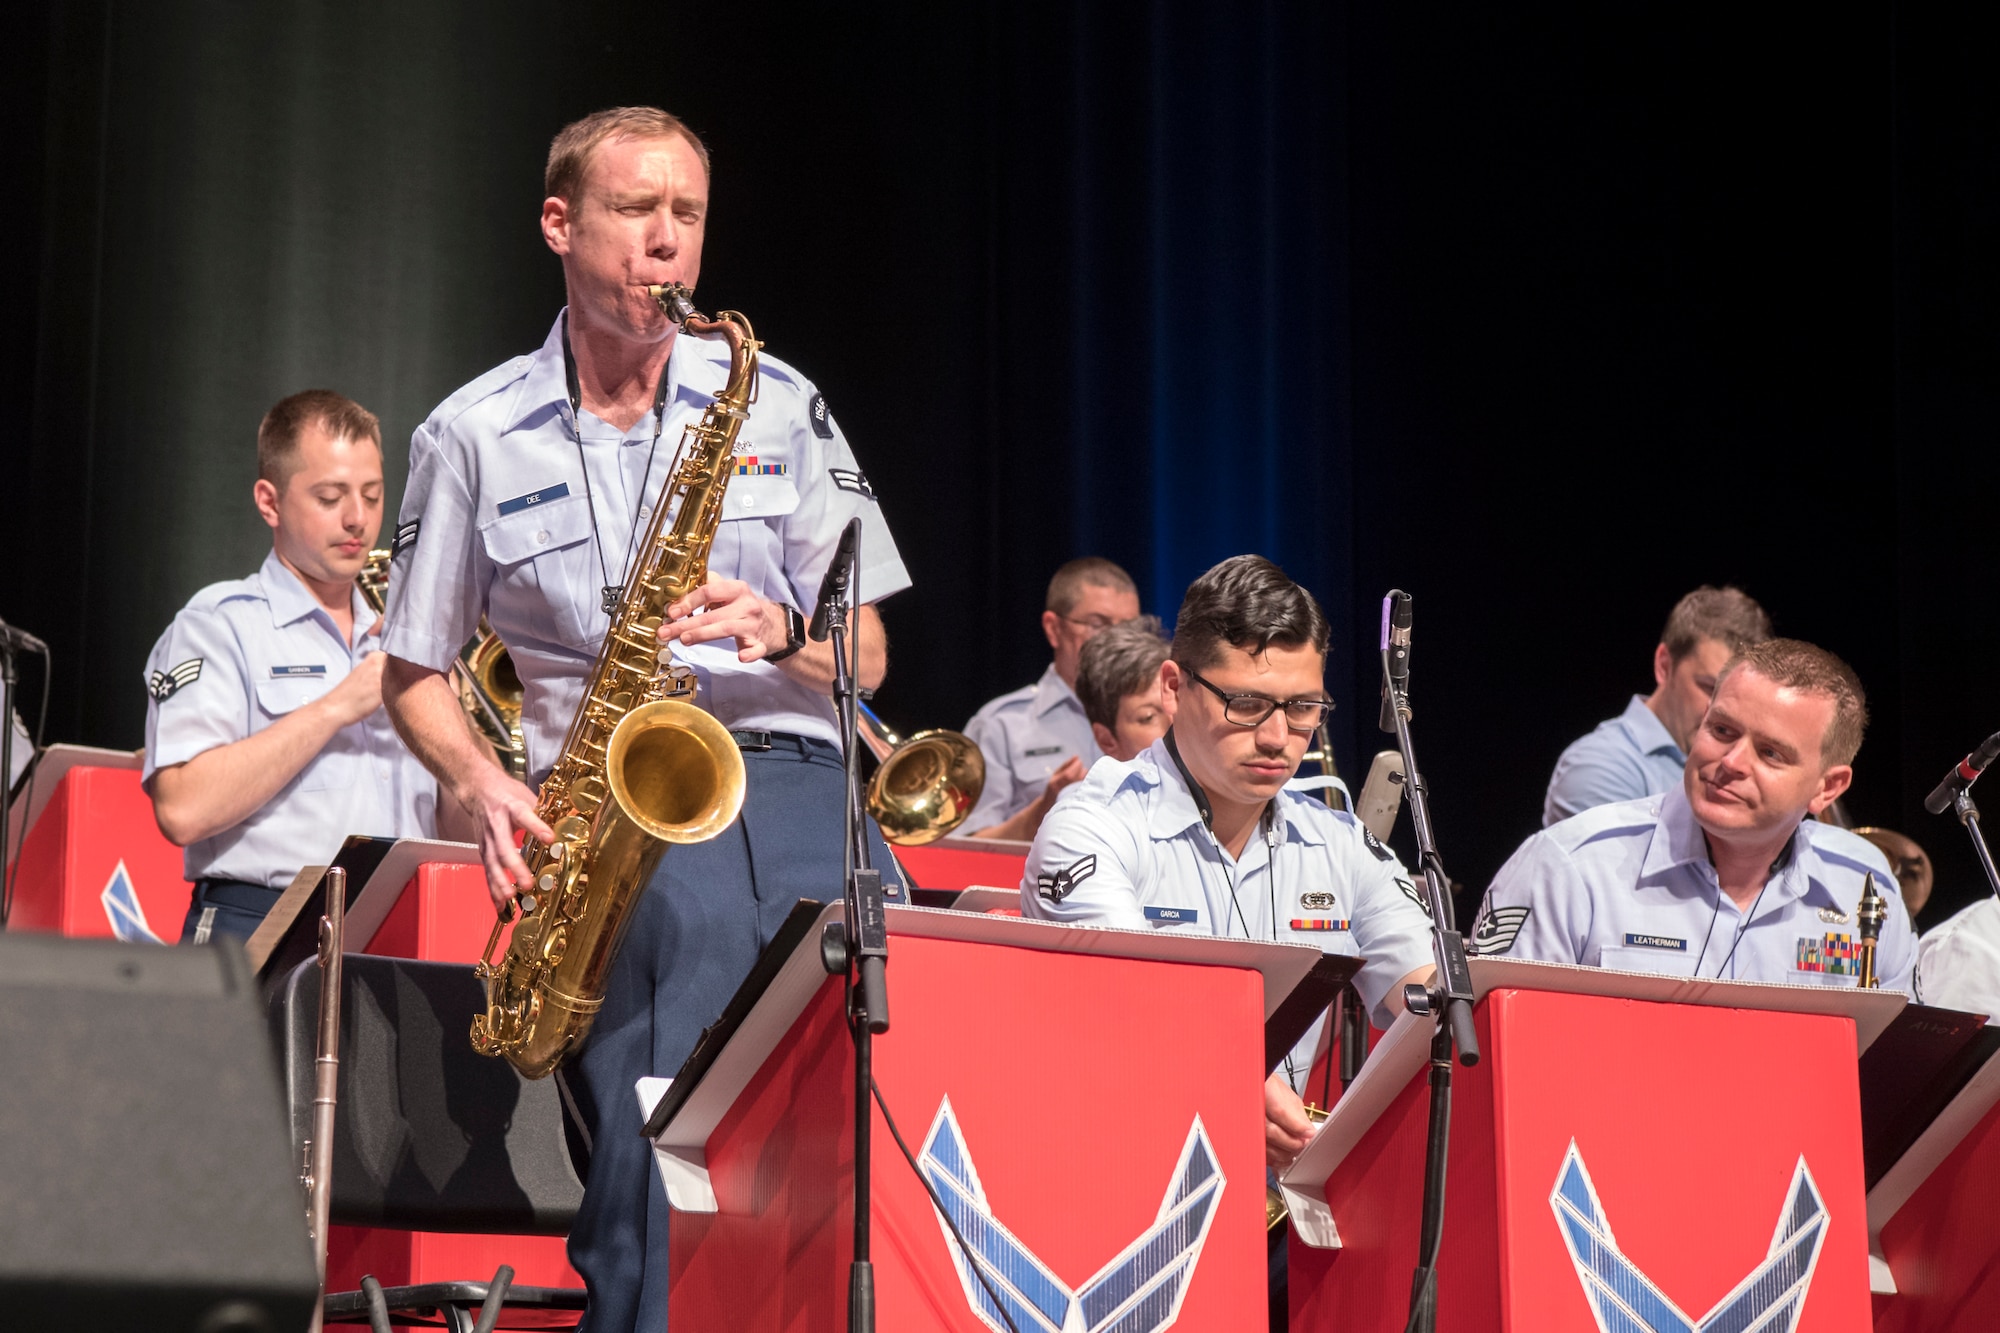 Airman 1st Class Michael Dee, U.S. Air Force Band of Mid-America Shades of Blue Jazz Ensemble saxophonist, performs a solo during a concert at the Honeywell Center in Wabash, Indiana Sept. 10, 2019. Prior to joining the Air Force, Airman Dee toured extensively across the United States and abroad with the funk and soul band Josh Hoyer and Soul Colossal. (U.S. Air Force photo/Master Sgt. Ben Mota)